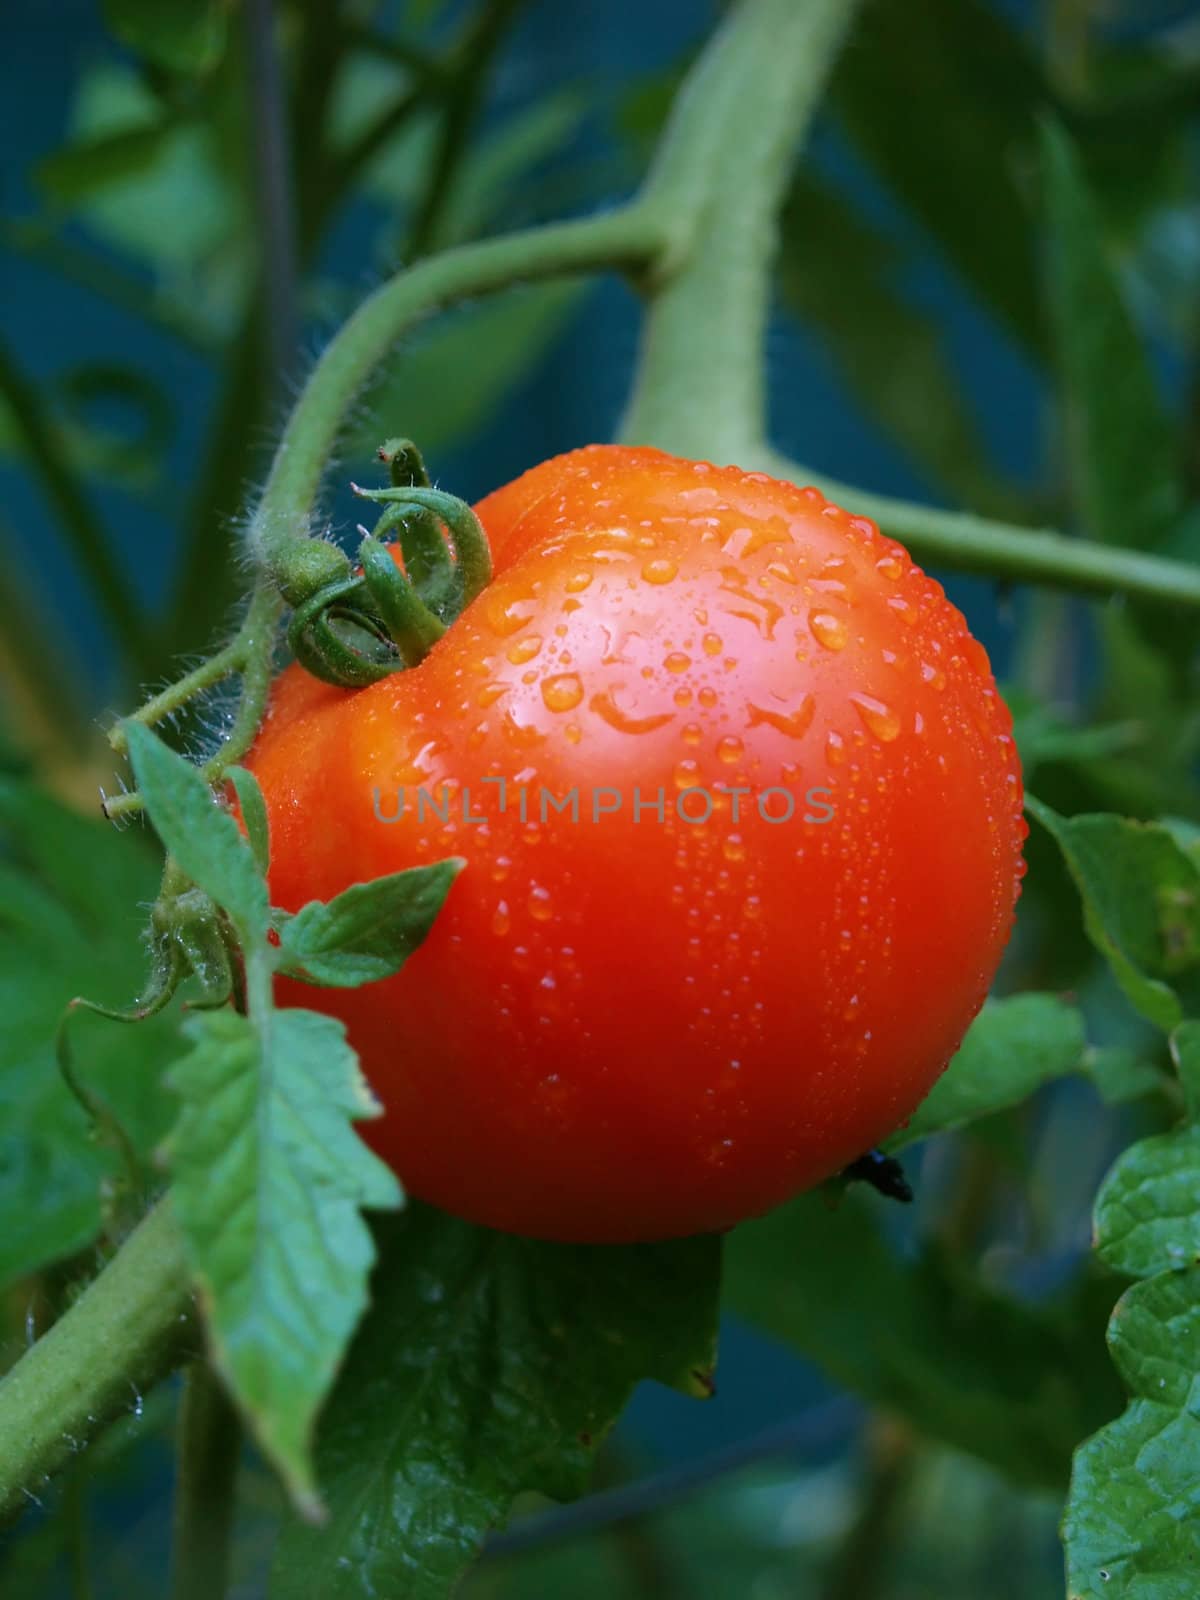 Bright red tomato growing on the vine with water drops on the skin